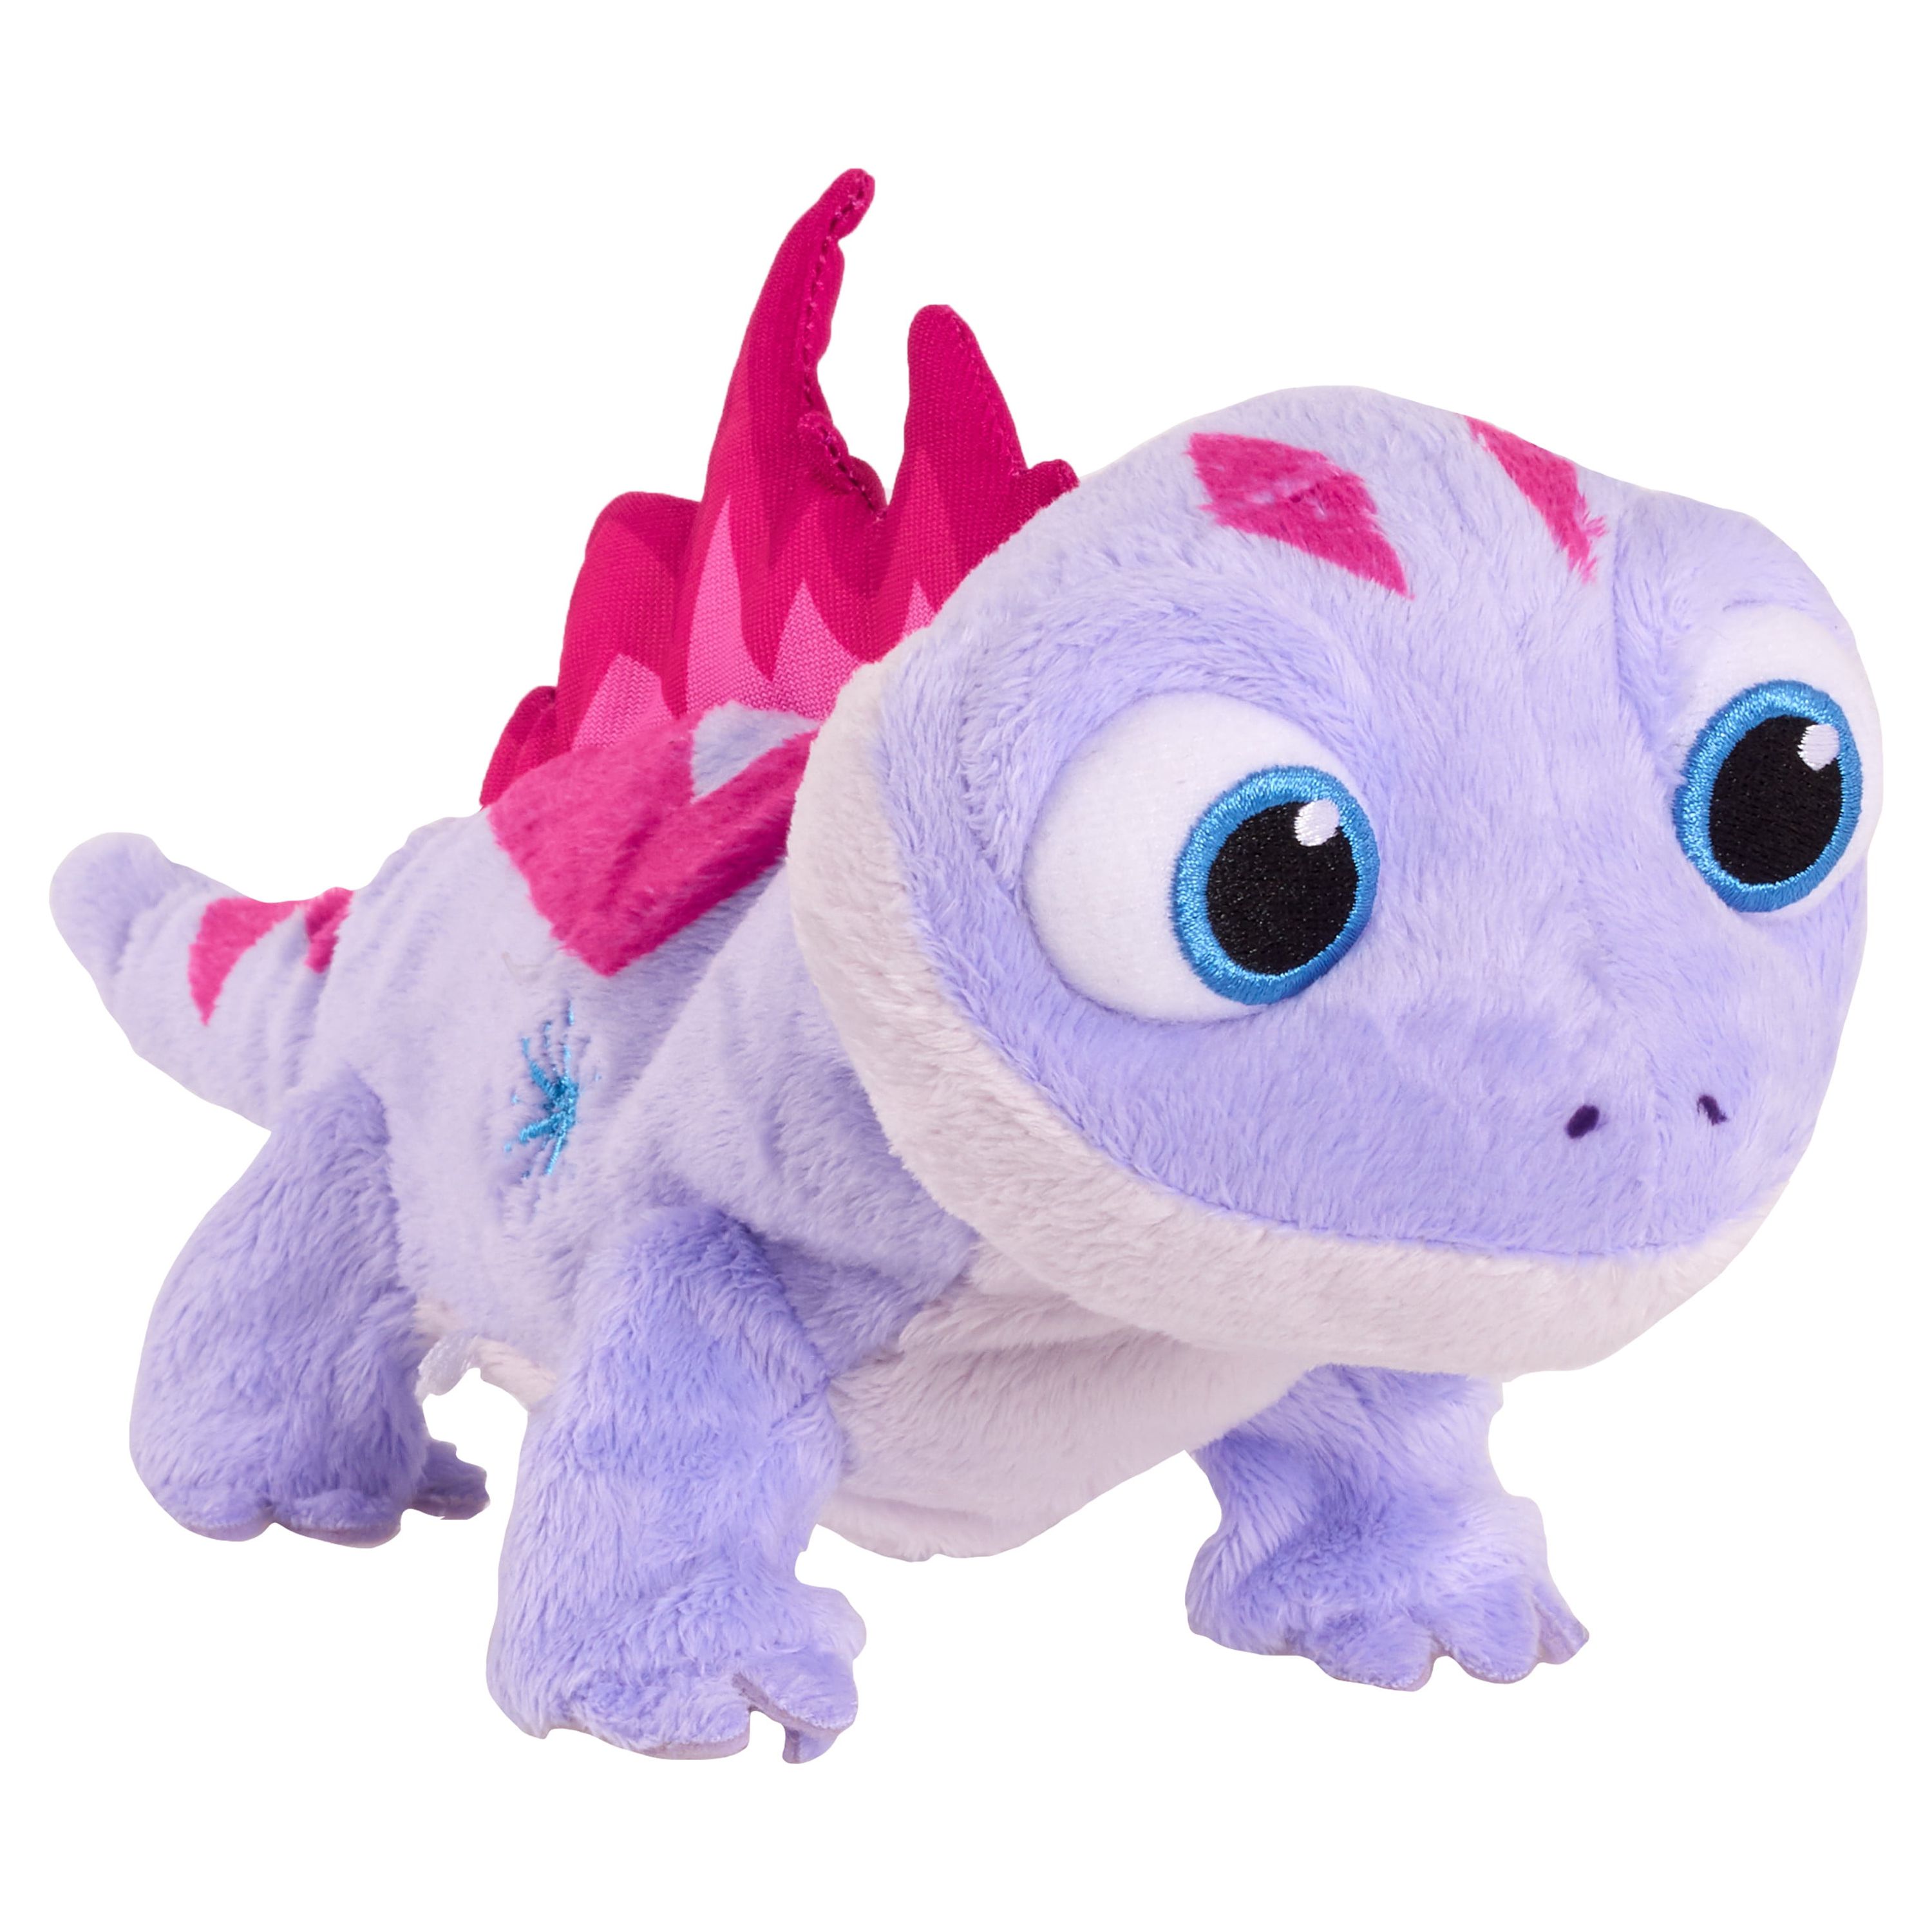 Disney Frozen 2 Walk & Glow Bruni The Salamander, Lights and Sounds Stuffed Animal, Officially Licensed Kids Toys for Ages 3 Up, Gifts and Presents - image 5 of 5